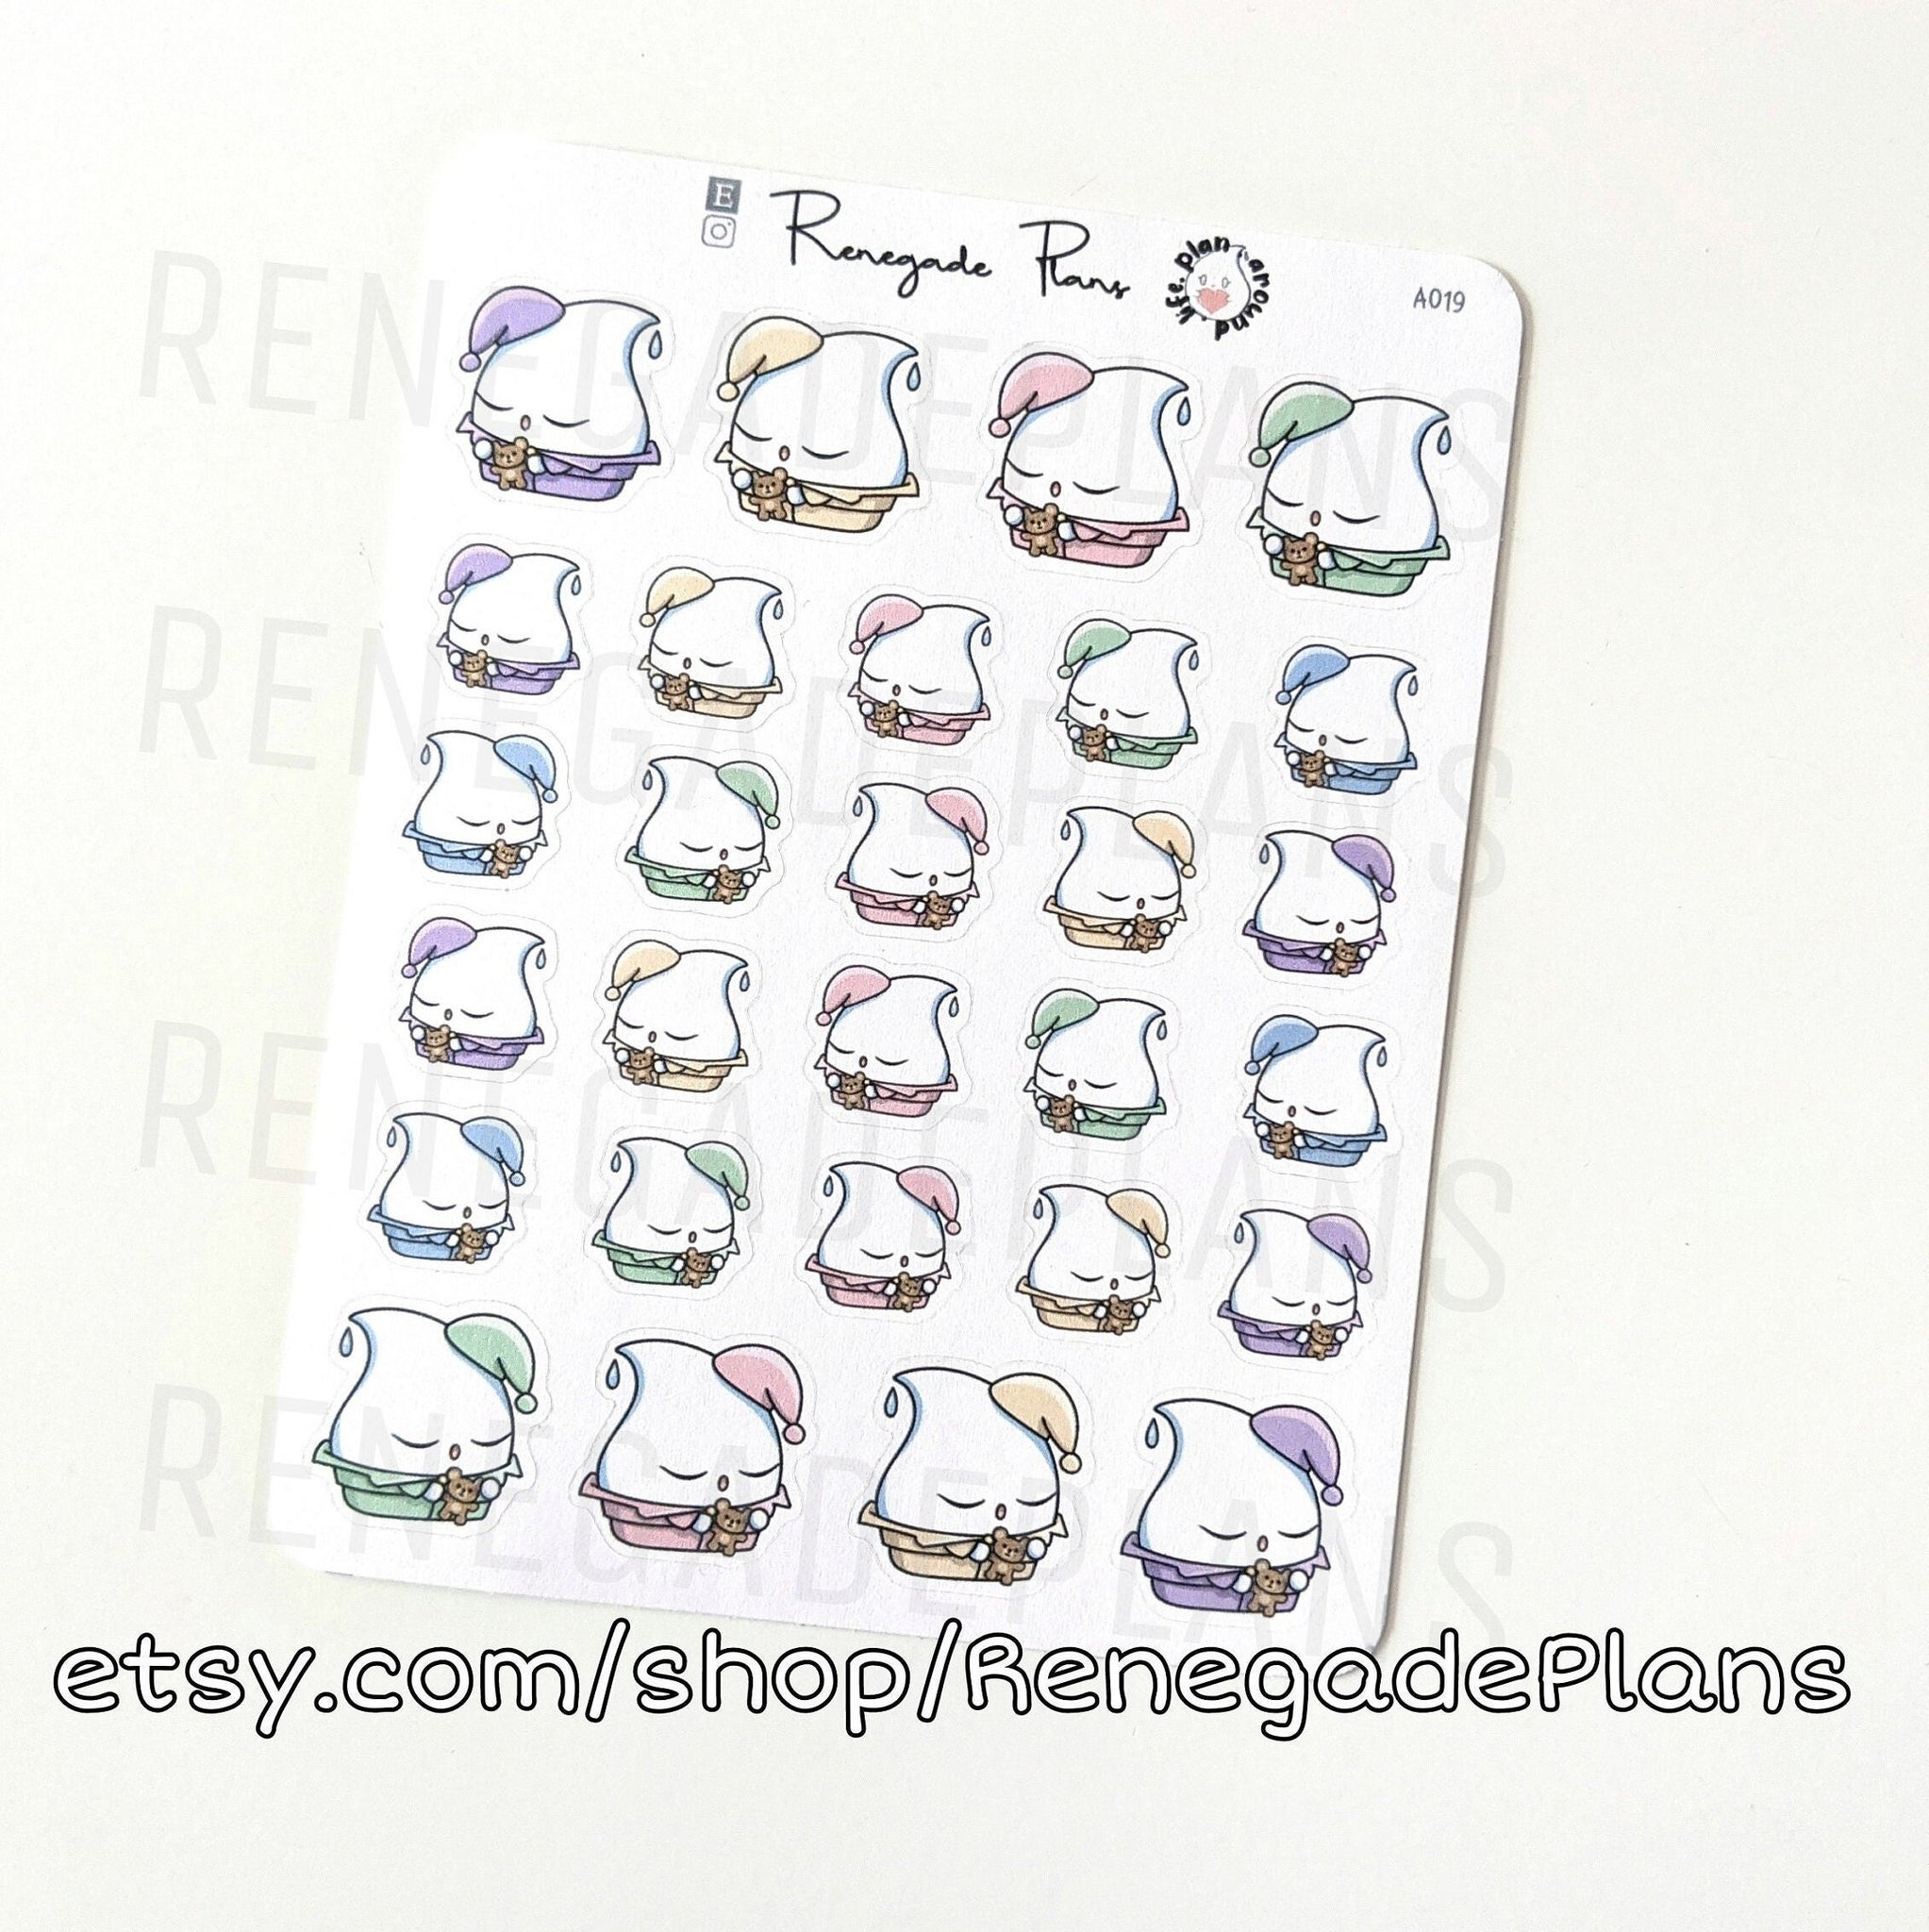 Sleepy Dreaming Bedtime Naptime in PJs Teara - Planner Stickers and Bullet Journal Scrapbooking stickers - Original Hand Drawn Character